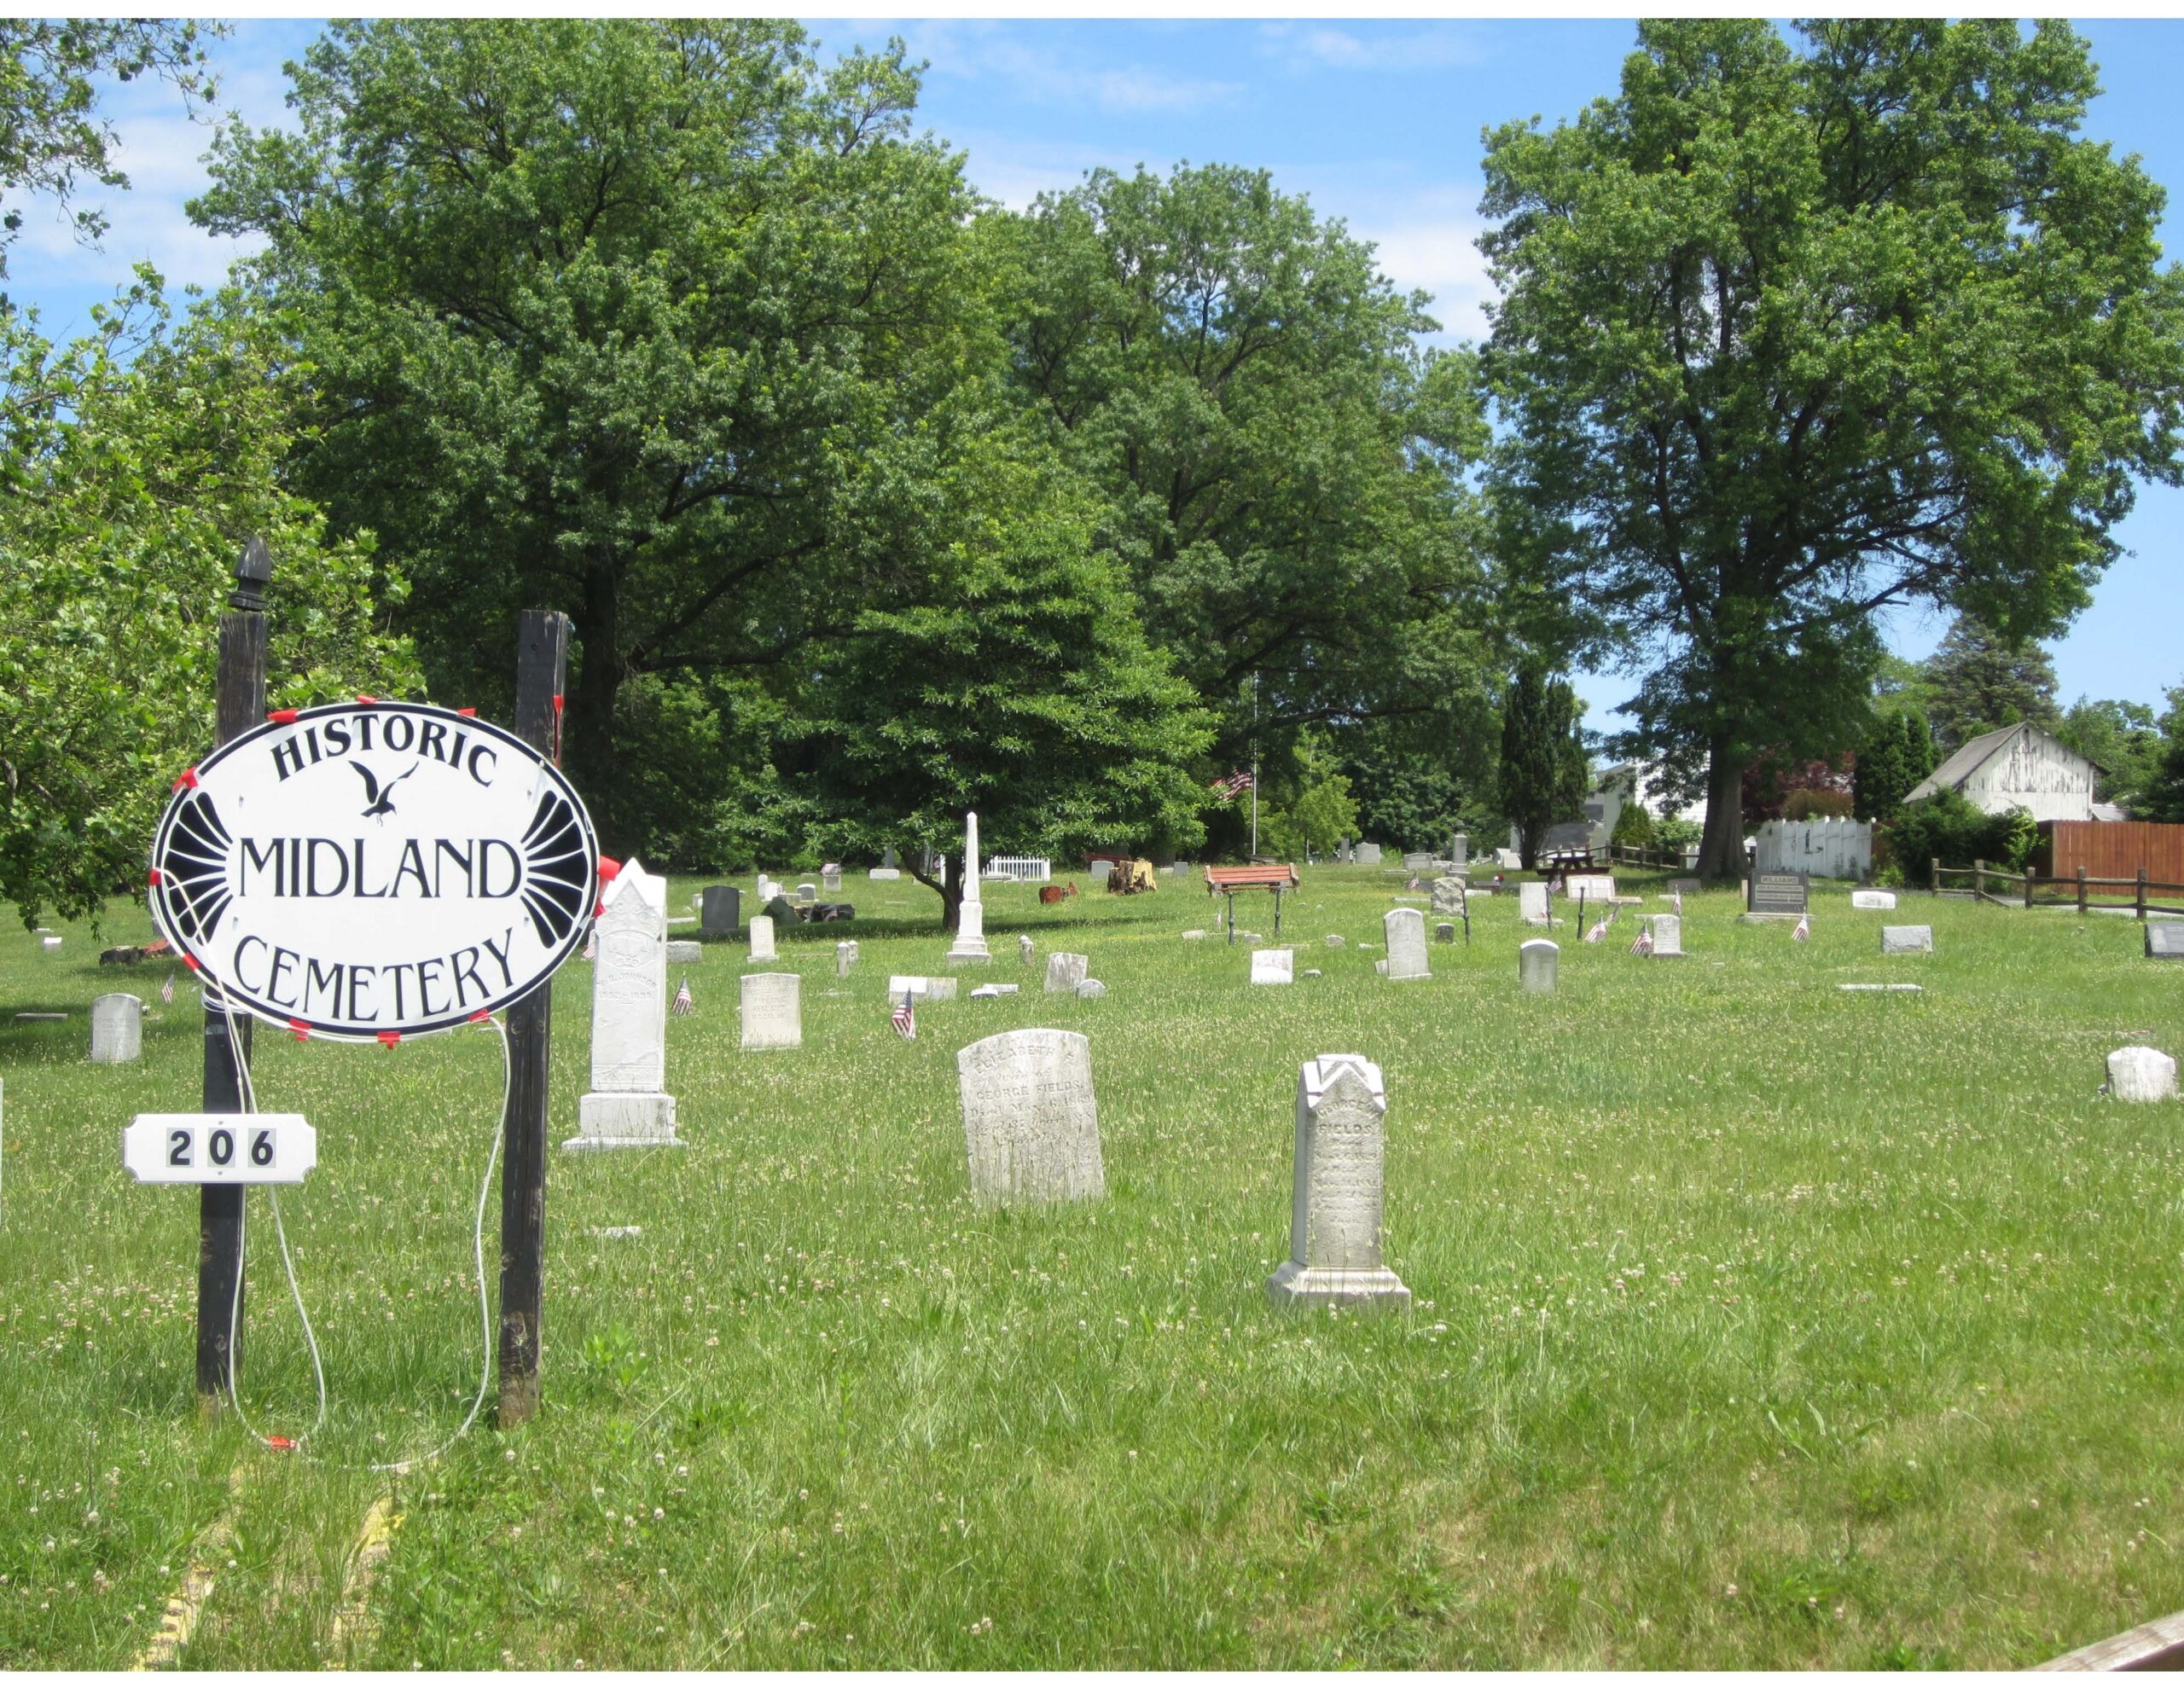 Grassy area with stone grave markers and sign.